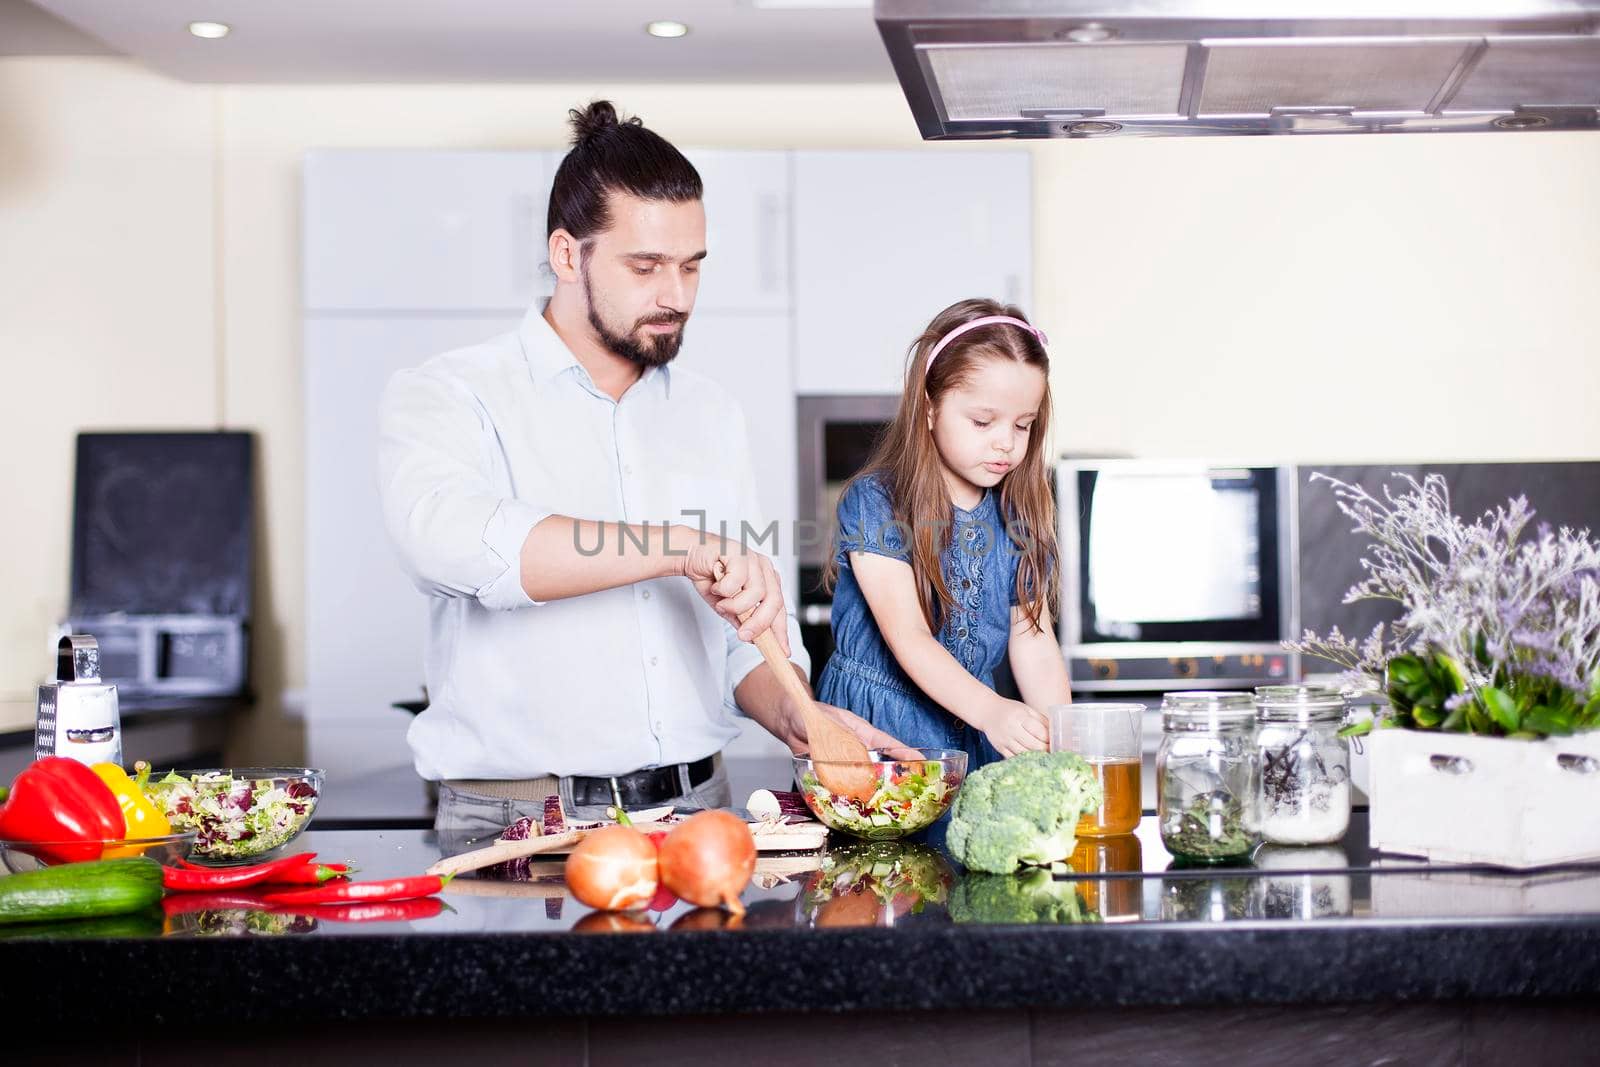 Young father and daughter cooking meal together